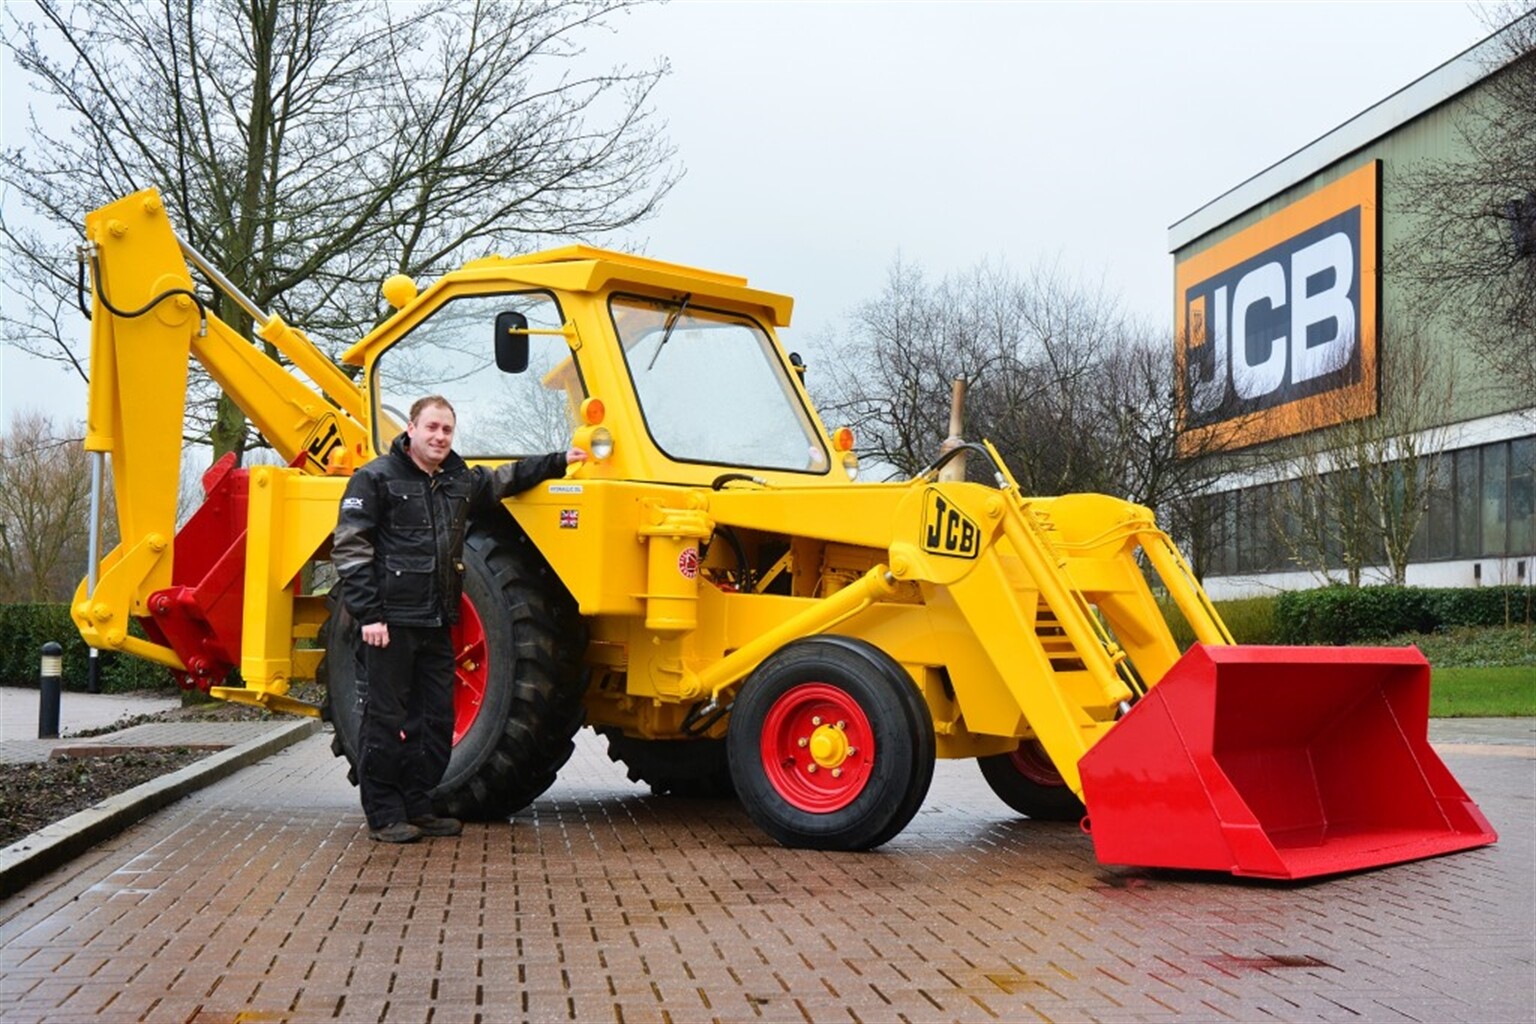 Incredible JCB restoration to feature at St Patricks Day parade